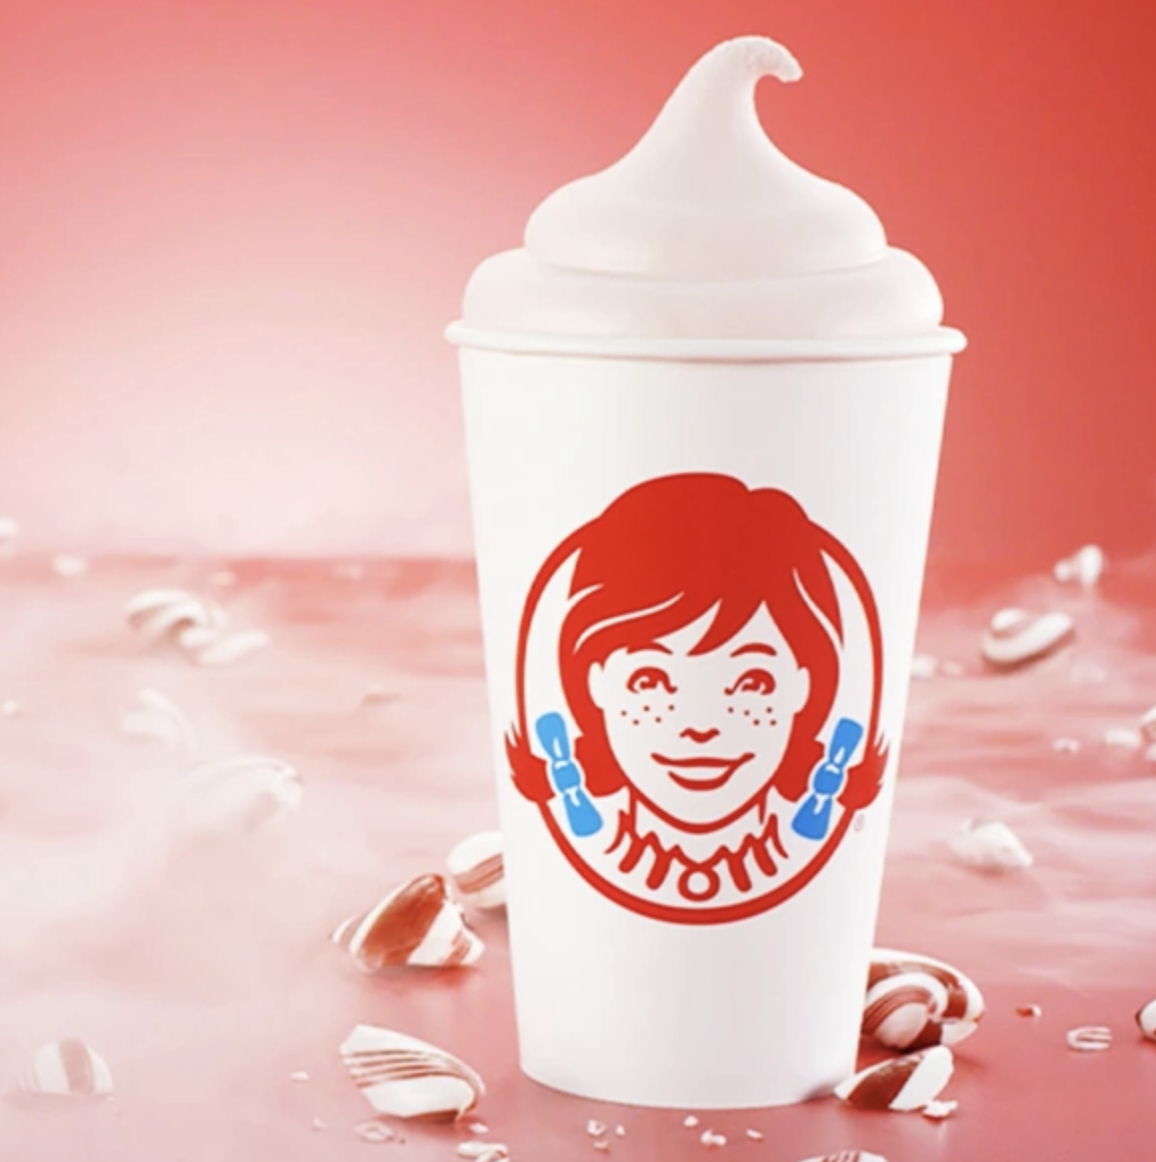 Wendy's Frosty Is Getting A LimitedTime Holiday Twist